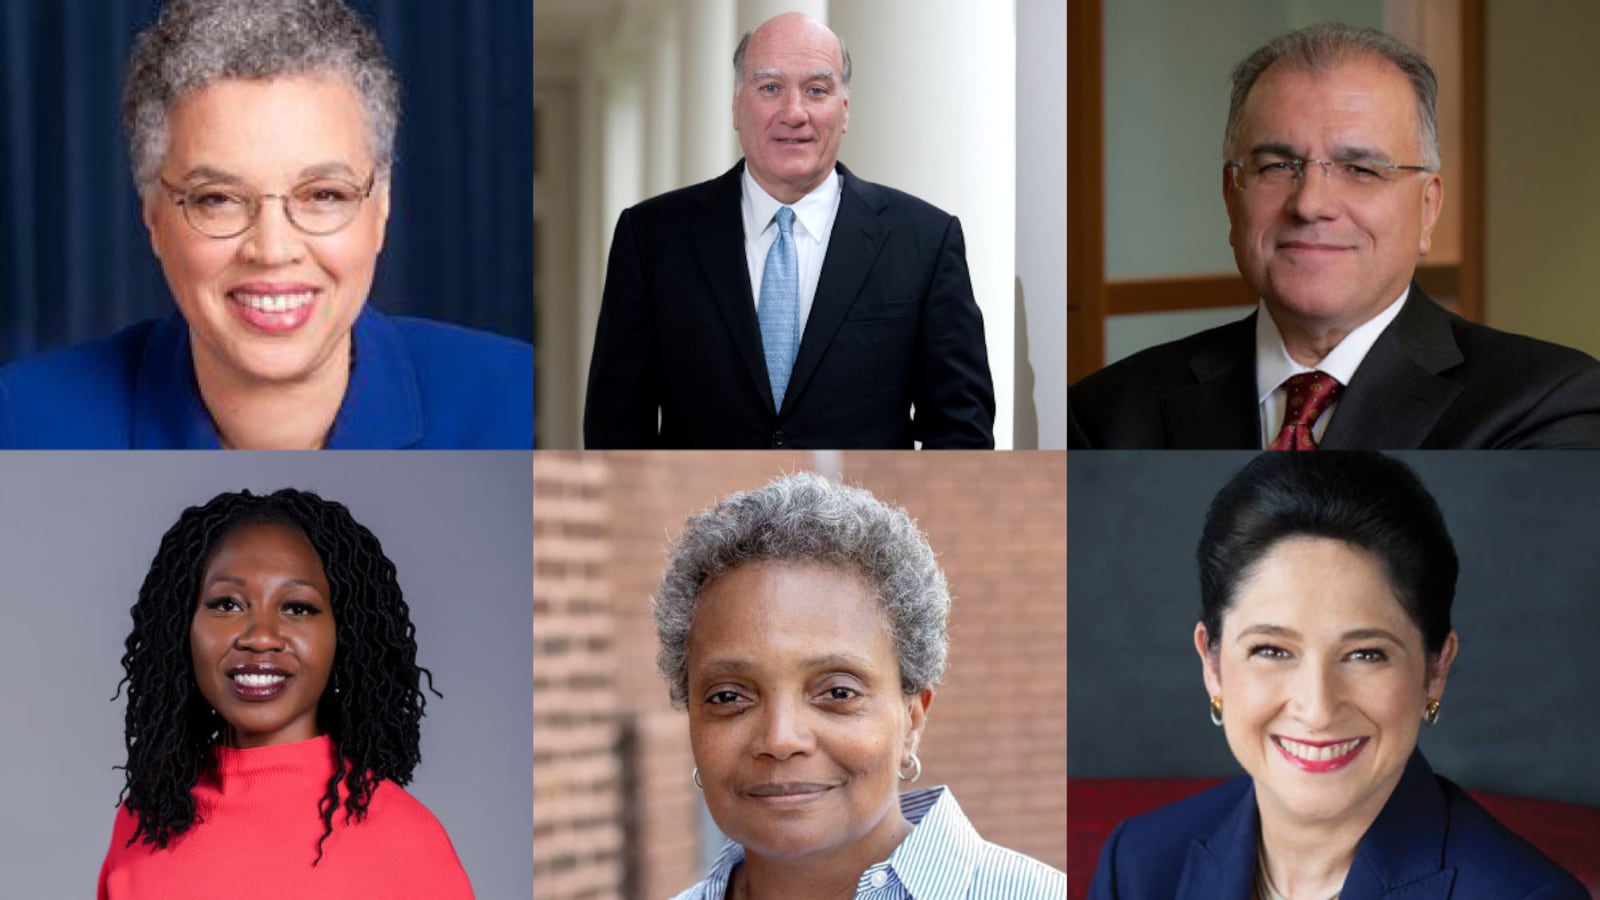 Chicago mayoral candidates (clockwise from upper left) Toni Preckwinkle, Bill Daley, Gery Chico, Susana Mendoza, Lori Lightfoot, and Amara Enyia